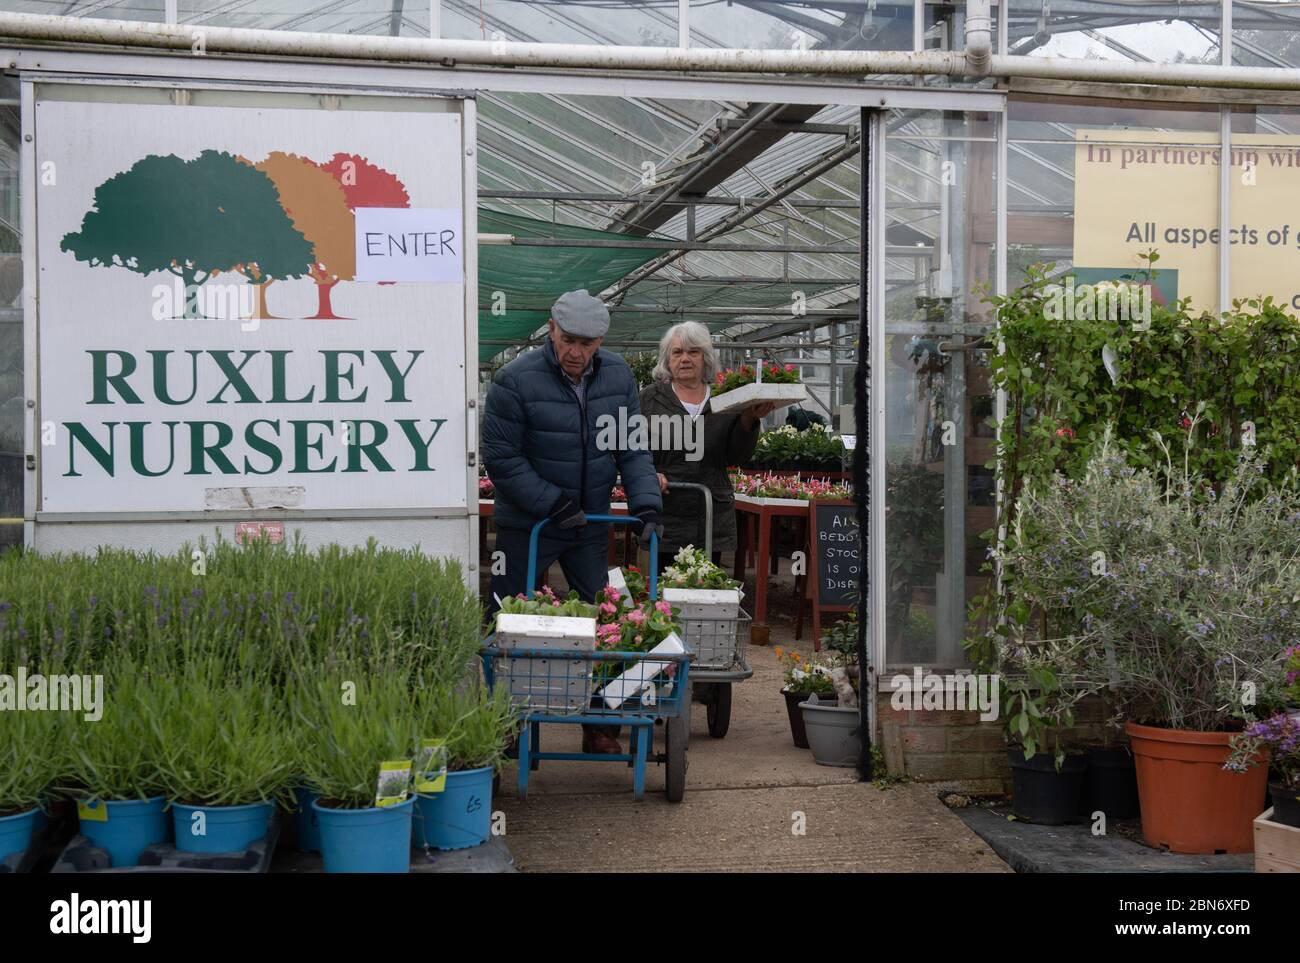 SIDCUP, KENT, UK. 13th May, 2020. Customers with their plants following the Government update to slowly release lockdown at Ruxley Nursery on Maidstone Road, Sidcup, Kent. Photo by Alan Stanford. Credit: PRiME Media Images/Alamy Live News Stock Photo